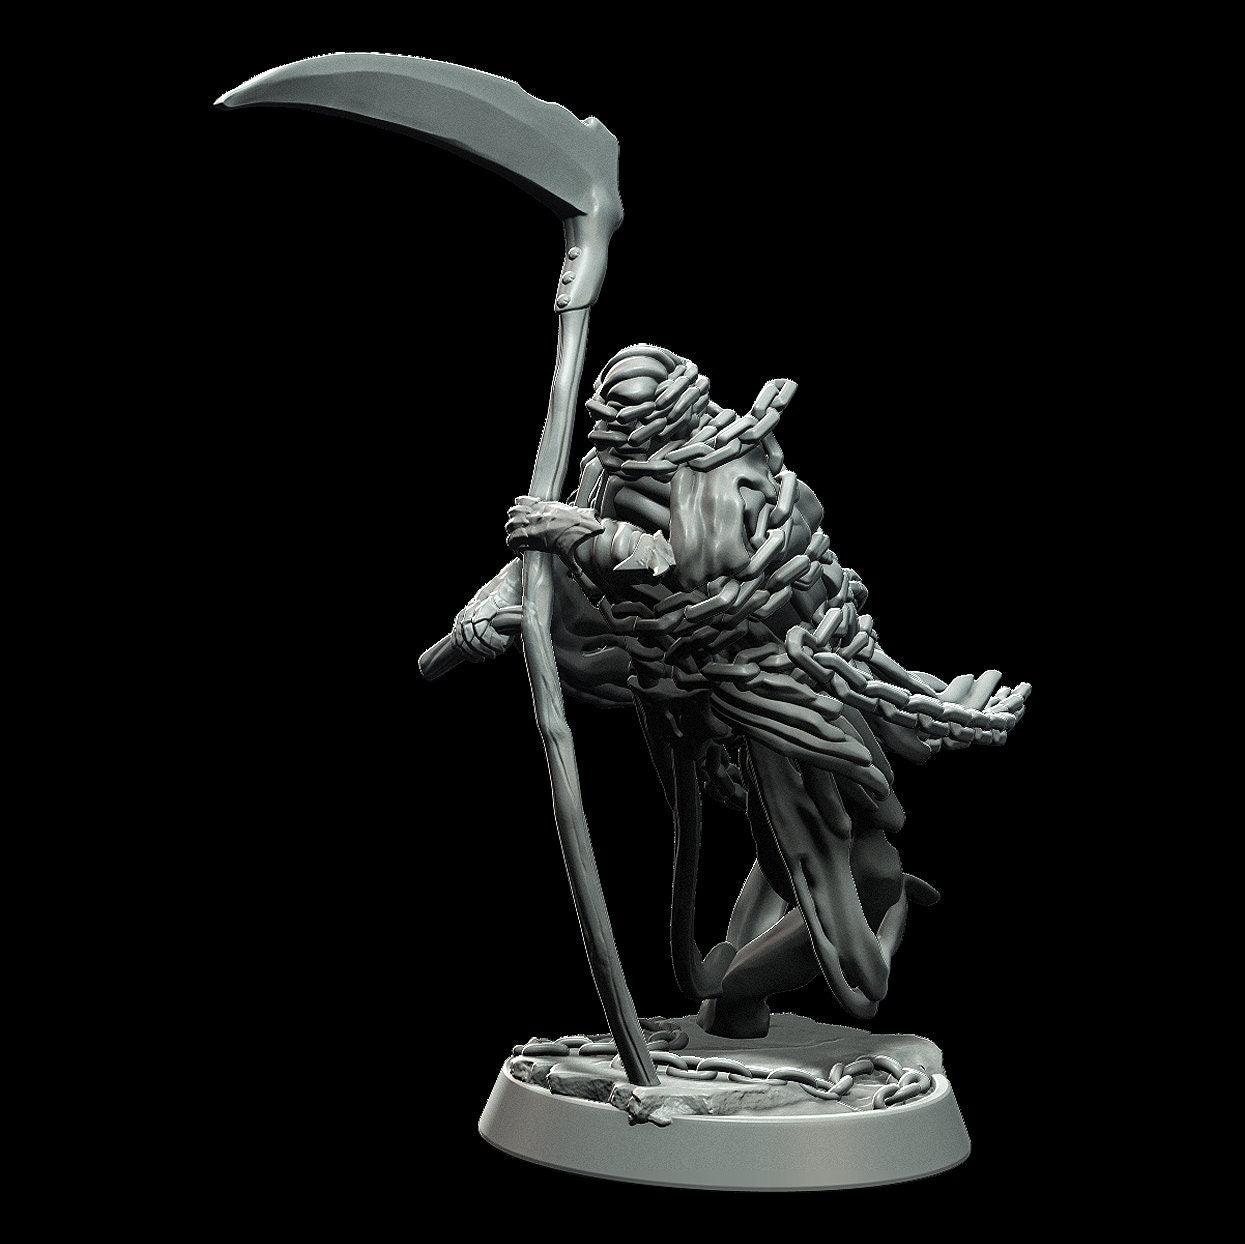 Imprisoned Soul Miniature dnd soul skeleton mini - 3 Poses - 28mm scale Tabletop gaming DnD Miniature Dungeons and Dragons,ttrpg dnd 5e - Plague Miniatures shop for DnD Miniatures